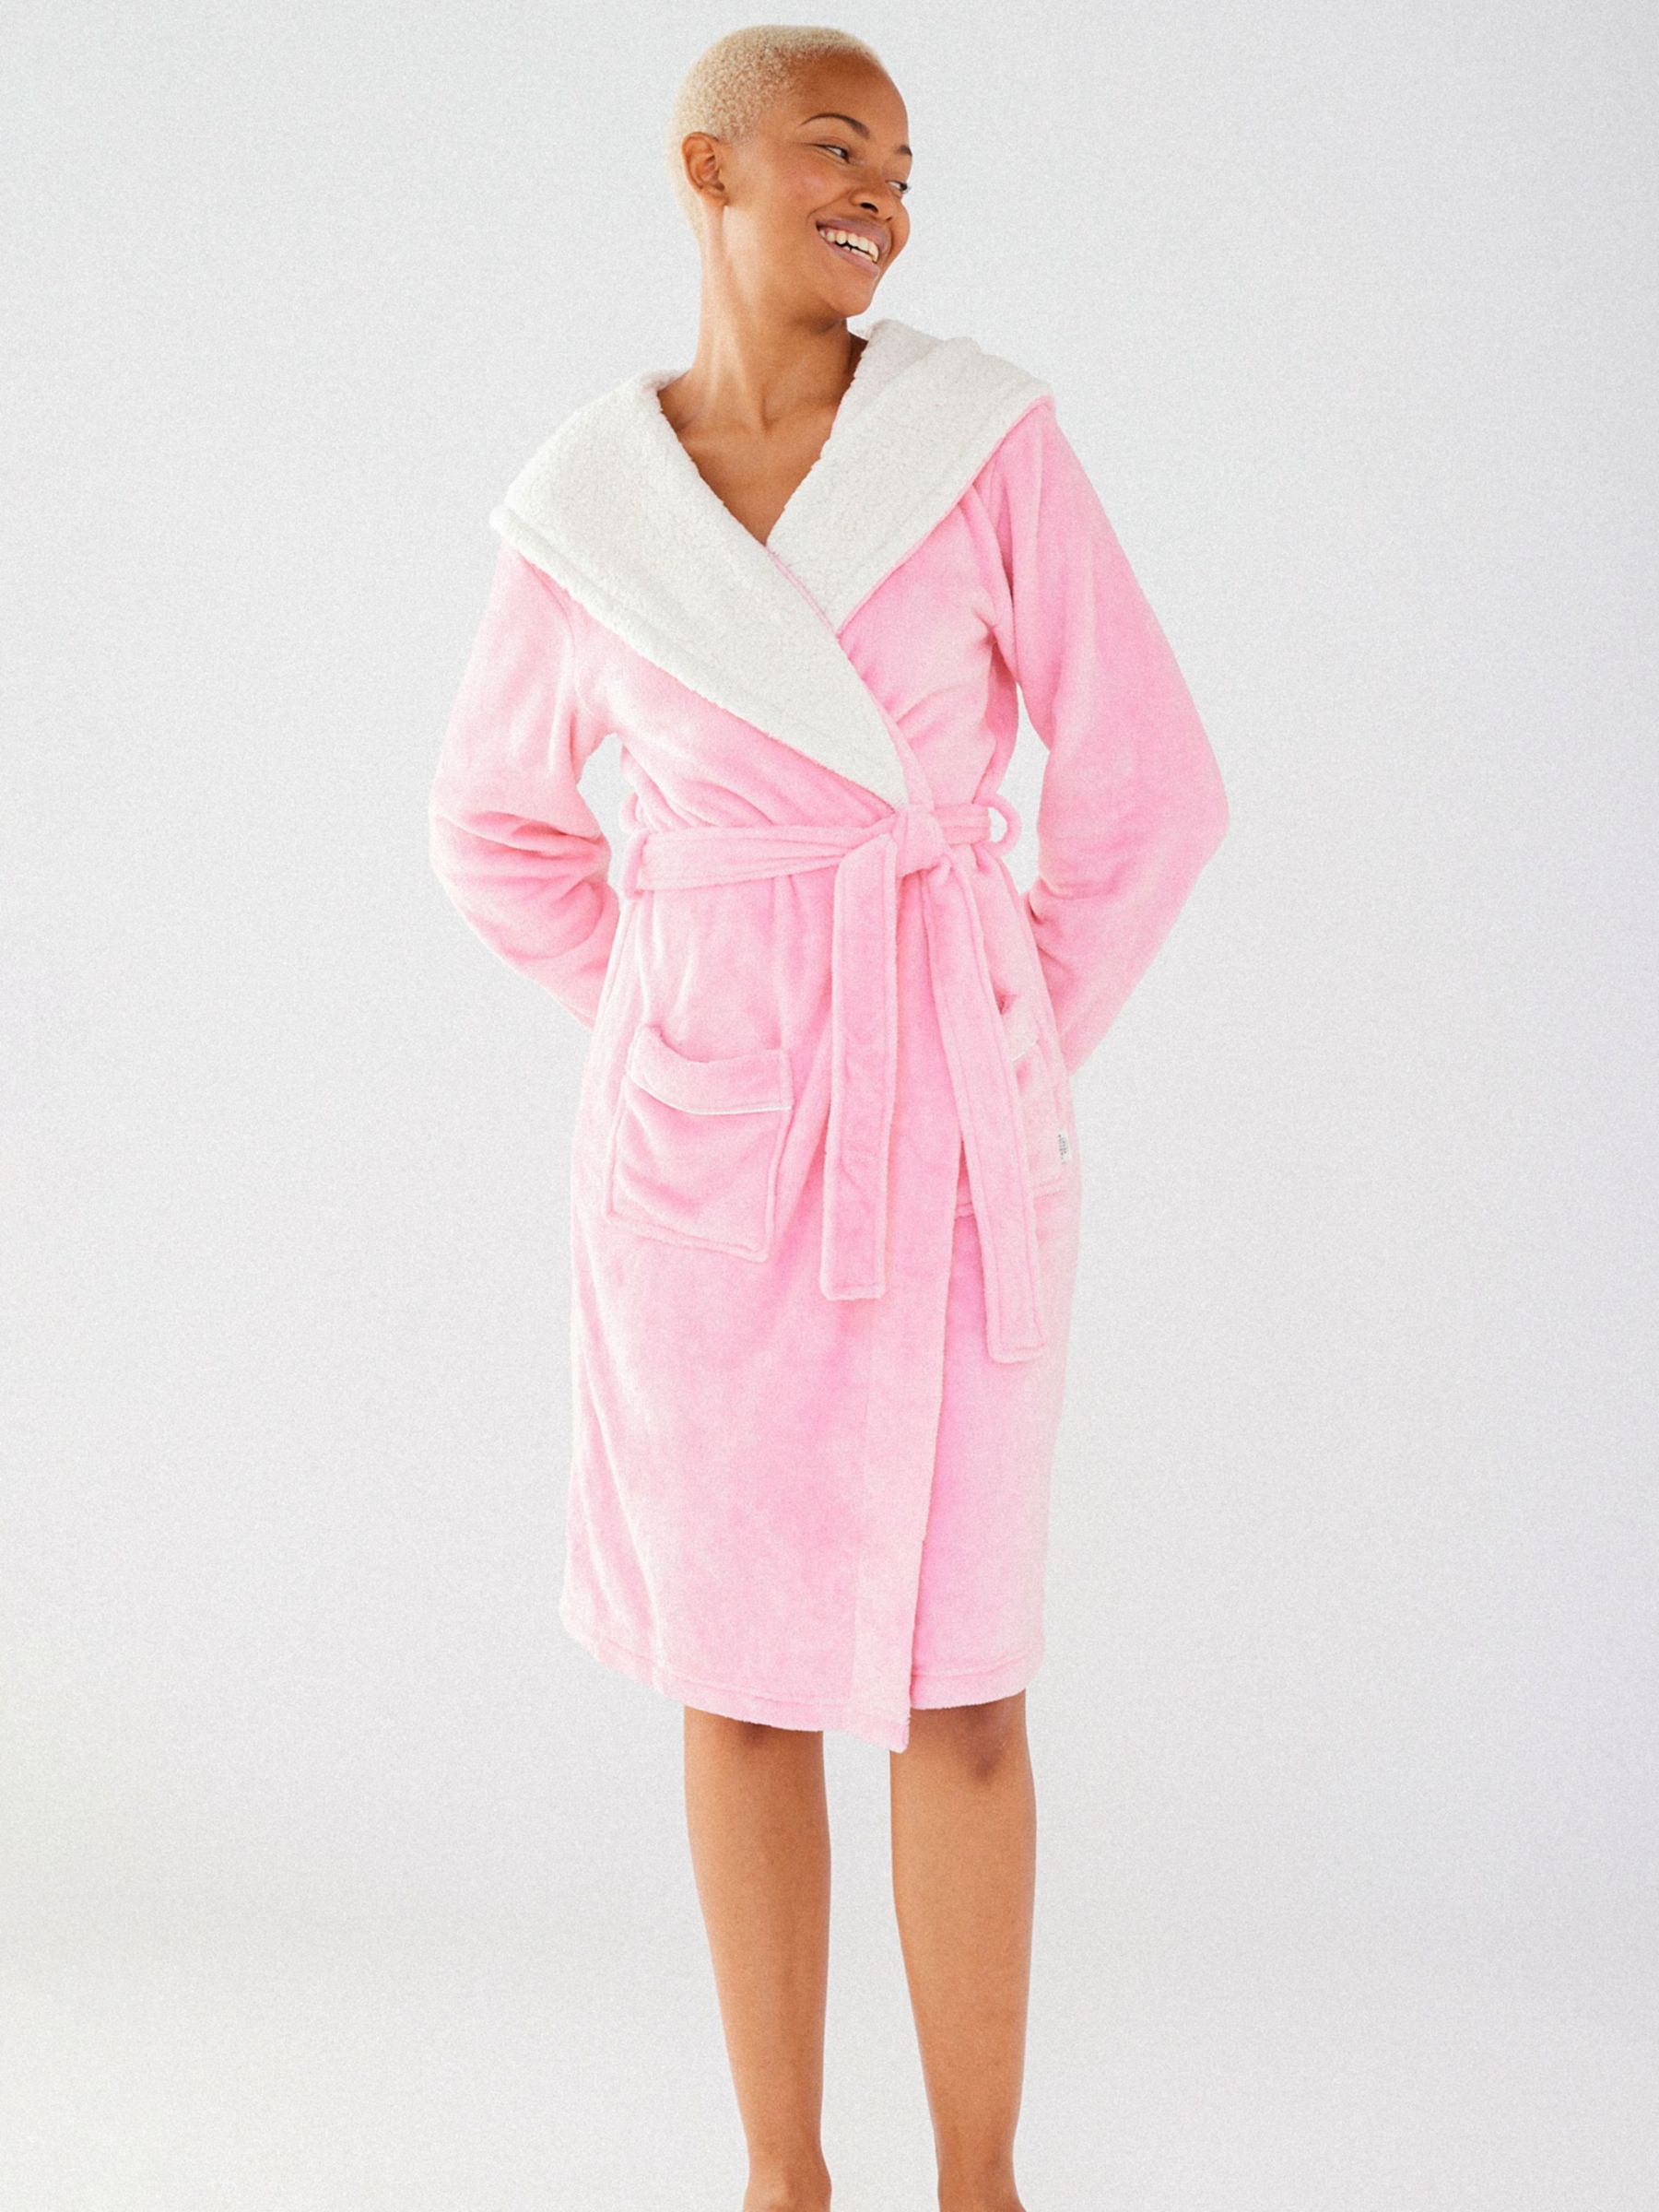 Chelsea Peers Fluffy Hooded Dressing Gown, Pink, 10